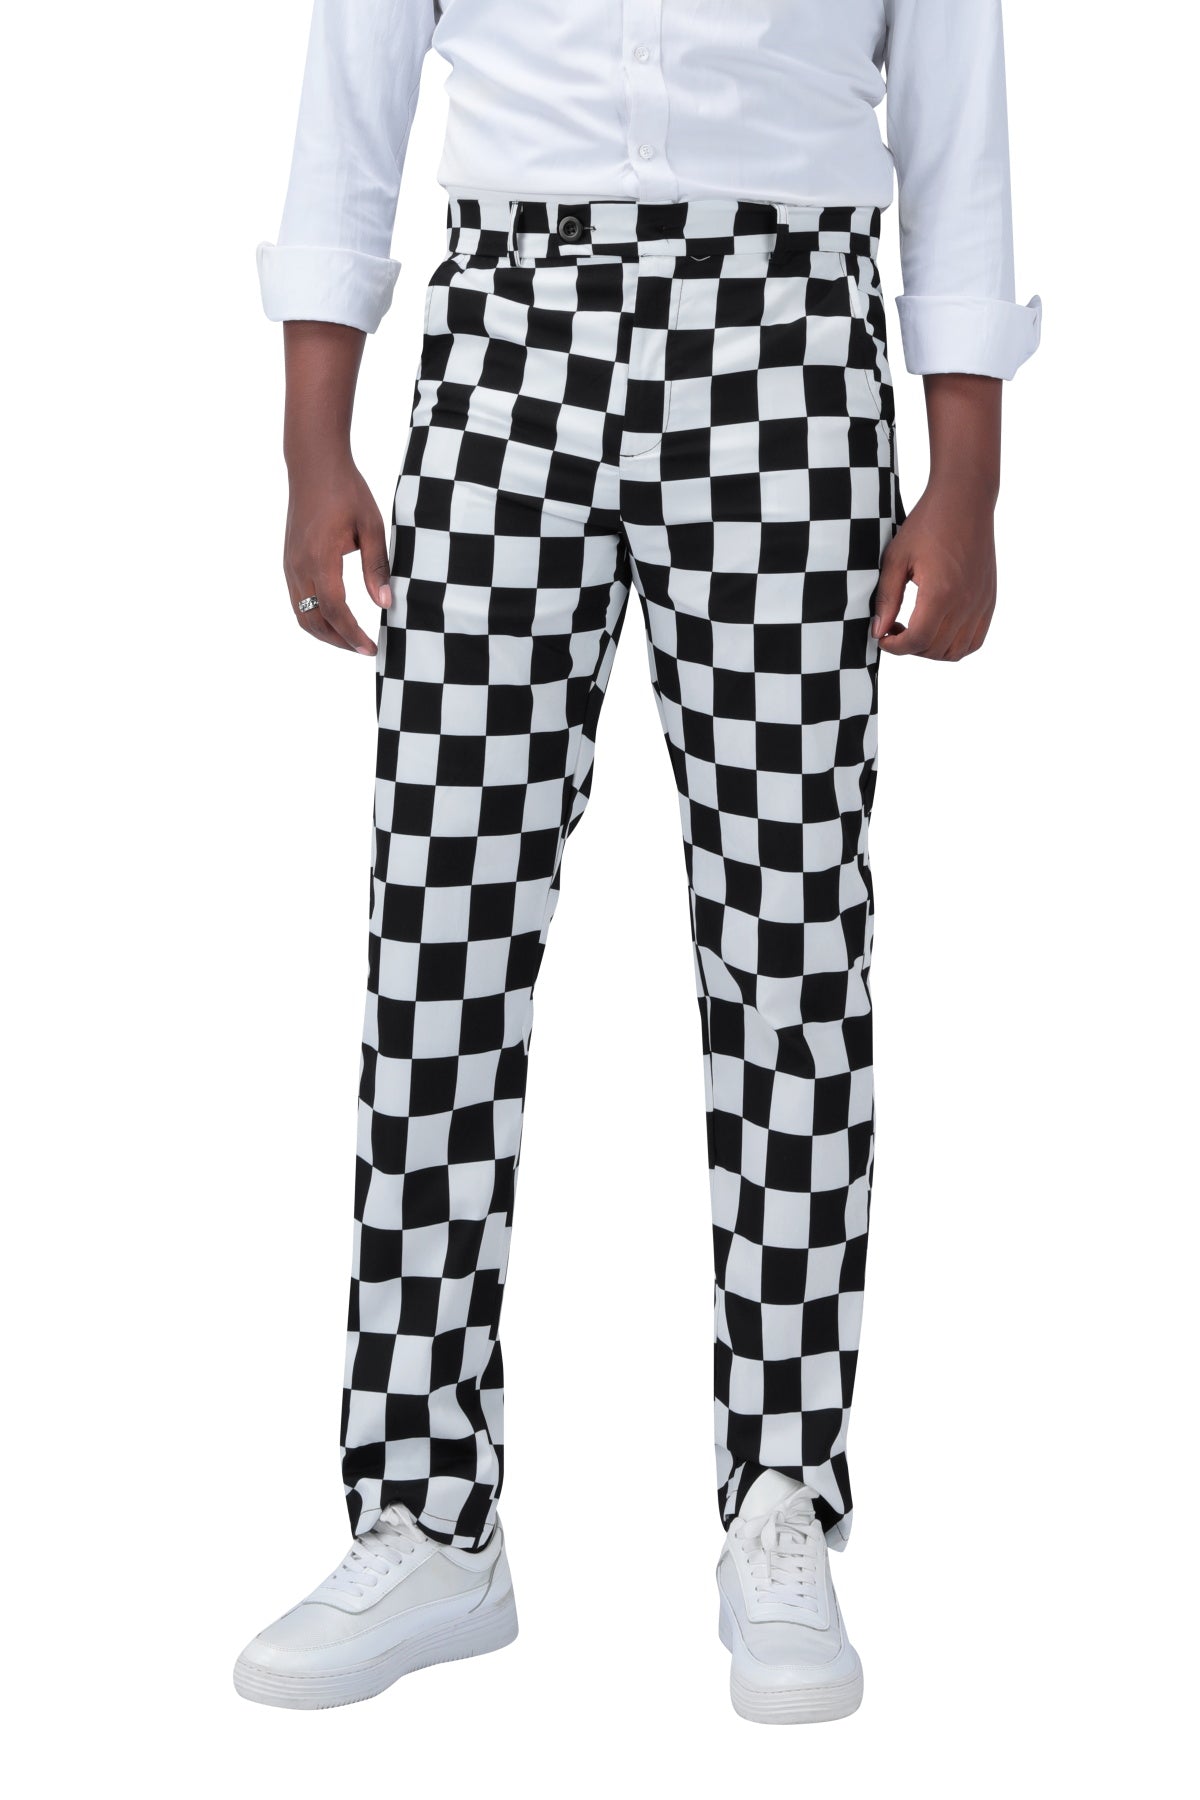 Men's Black and White Check Straight Casual Trousers